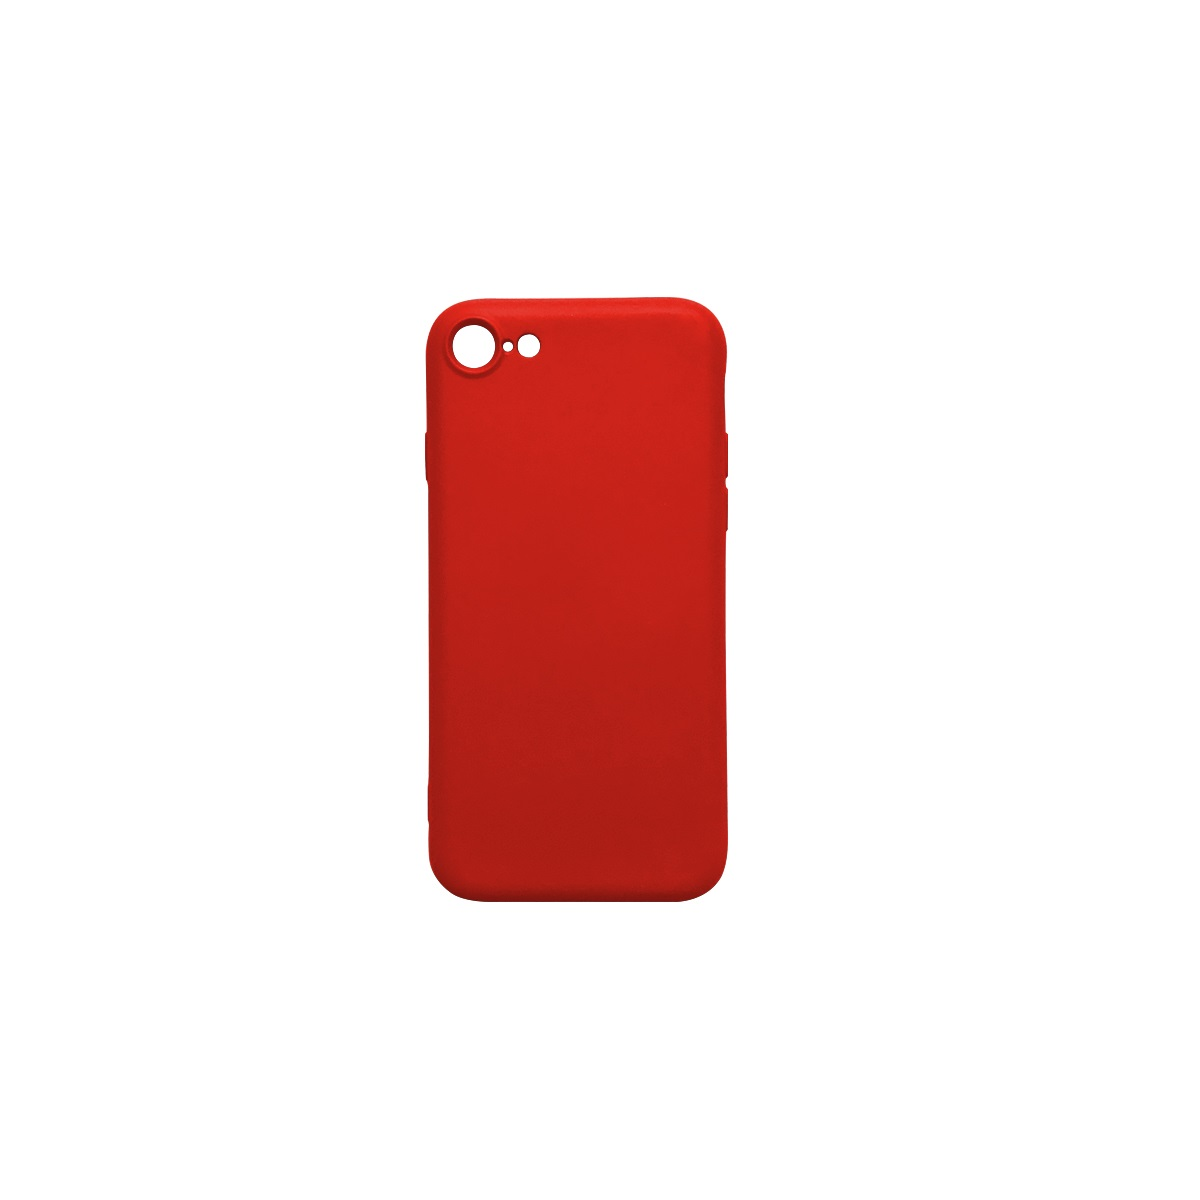 Handyhülle, iPhone 8, SE Apple, Generation), Hülle, Rot iPhone 7, VENTARENT iPhone 2020 Backcover, (2 iPhone